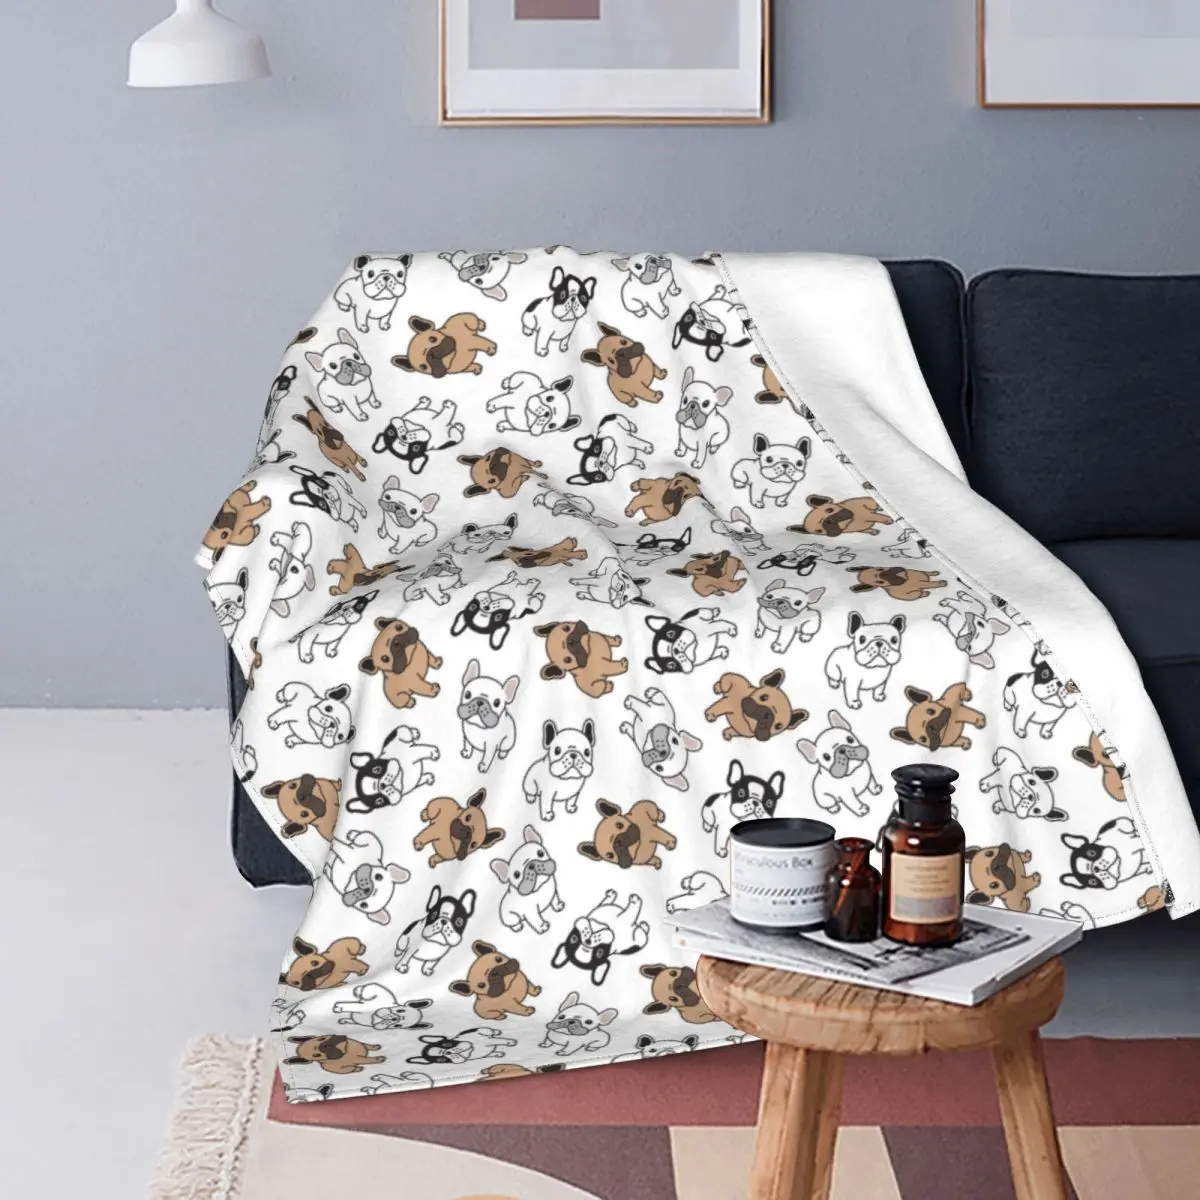 

French Bulldog Dog Blankets Fleece Decoration Animal Cute Breathable Ultra-Soft Throw Blankets for Home Couch Quilt